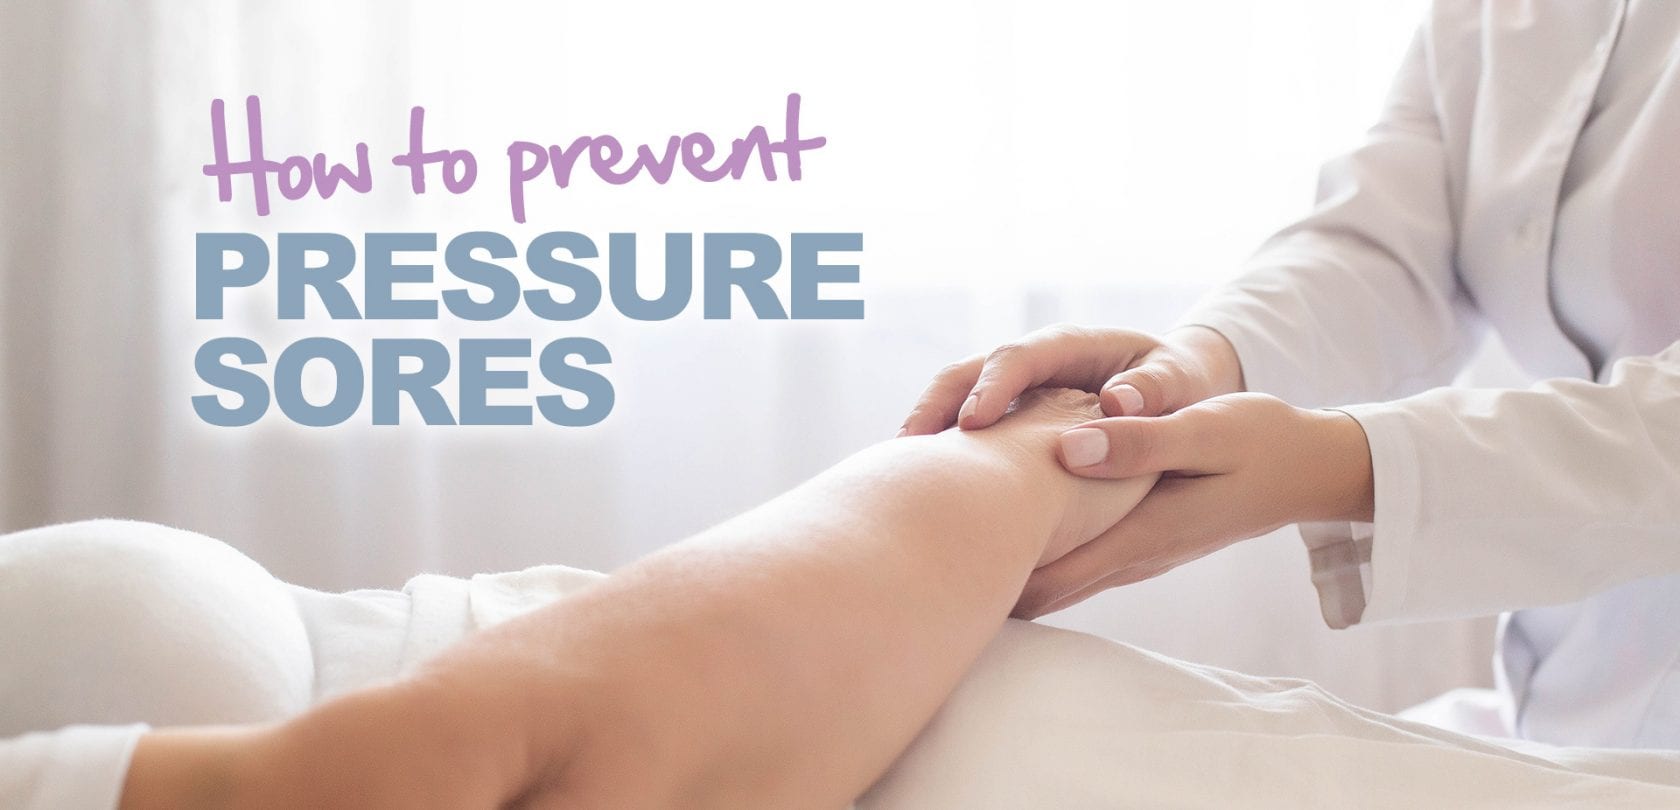 https://zenesse.health/wp-content/uploads/2021/01/How-to-prevent-pressure-sores-scaled.jpg